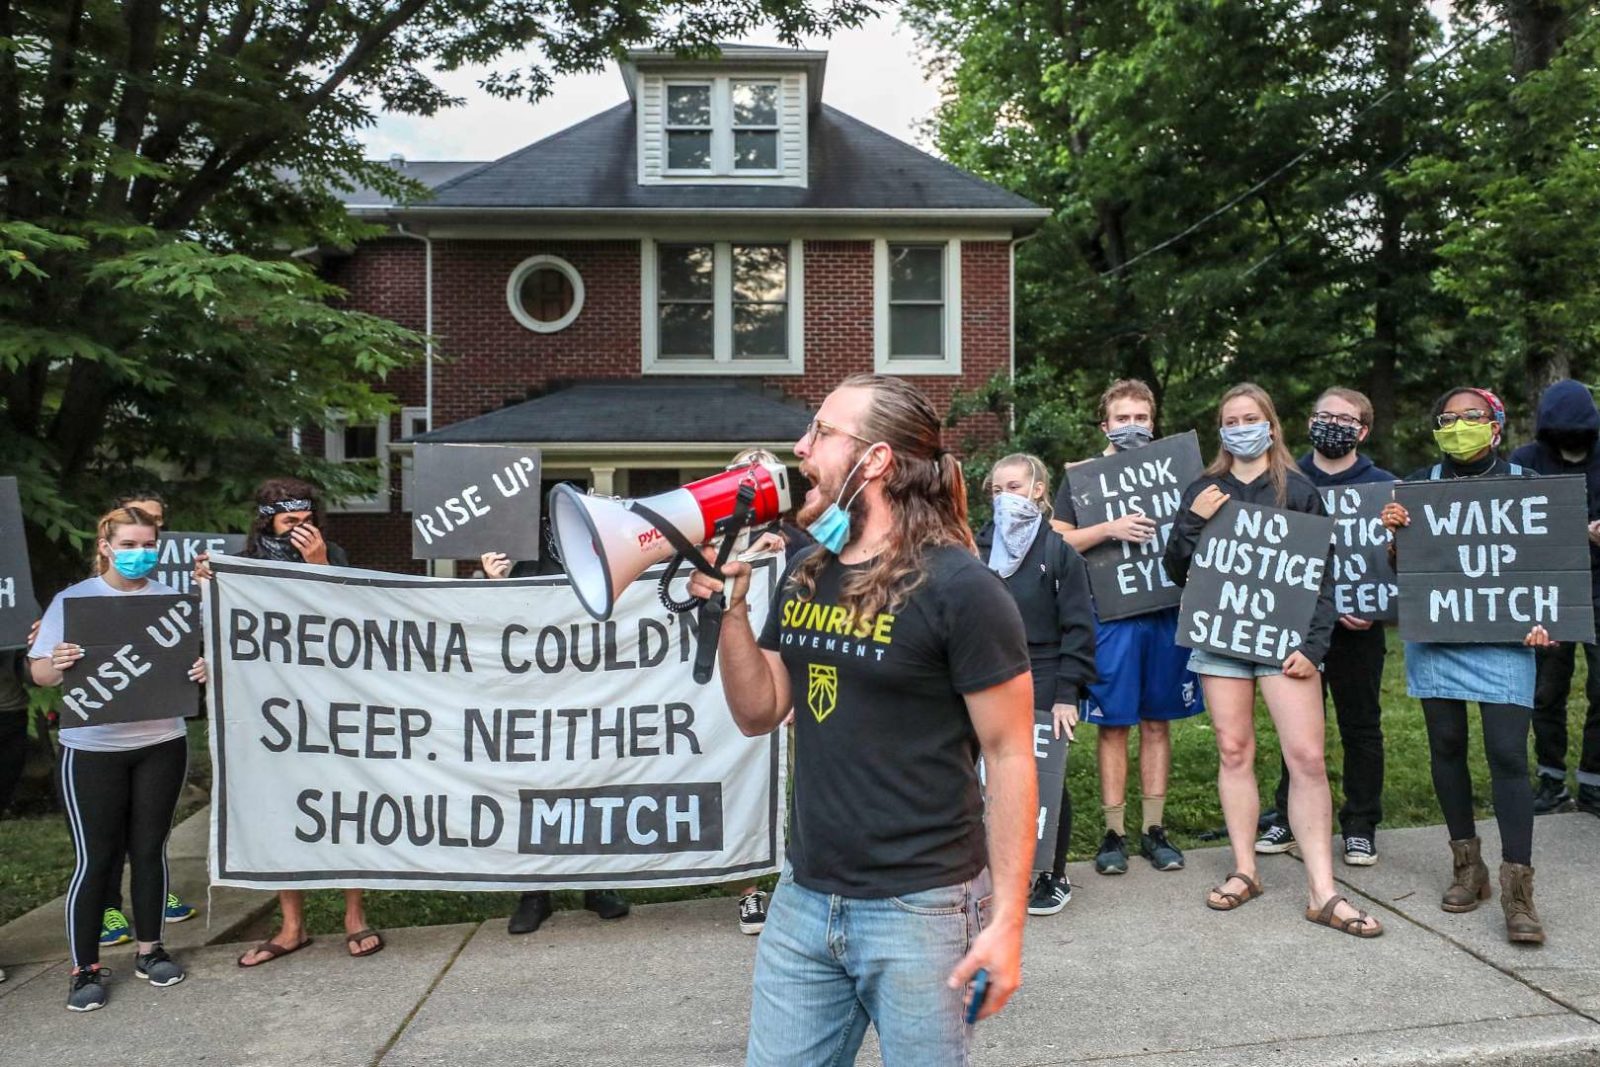 A Sunrise activist speaks into a megaphone while fellow protesters stand in front of Mitch McConnell's KY house holding a large sign saying "Breonna Couldn't Sleep. Neither Should Mitch".